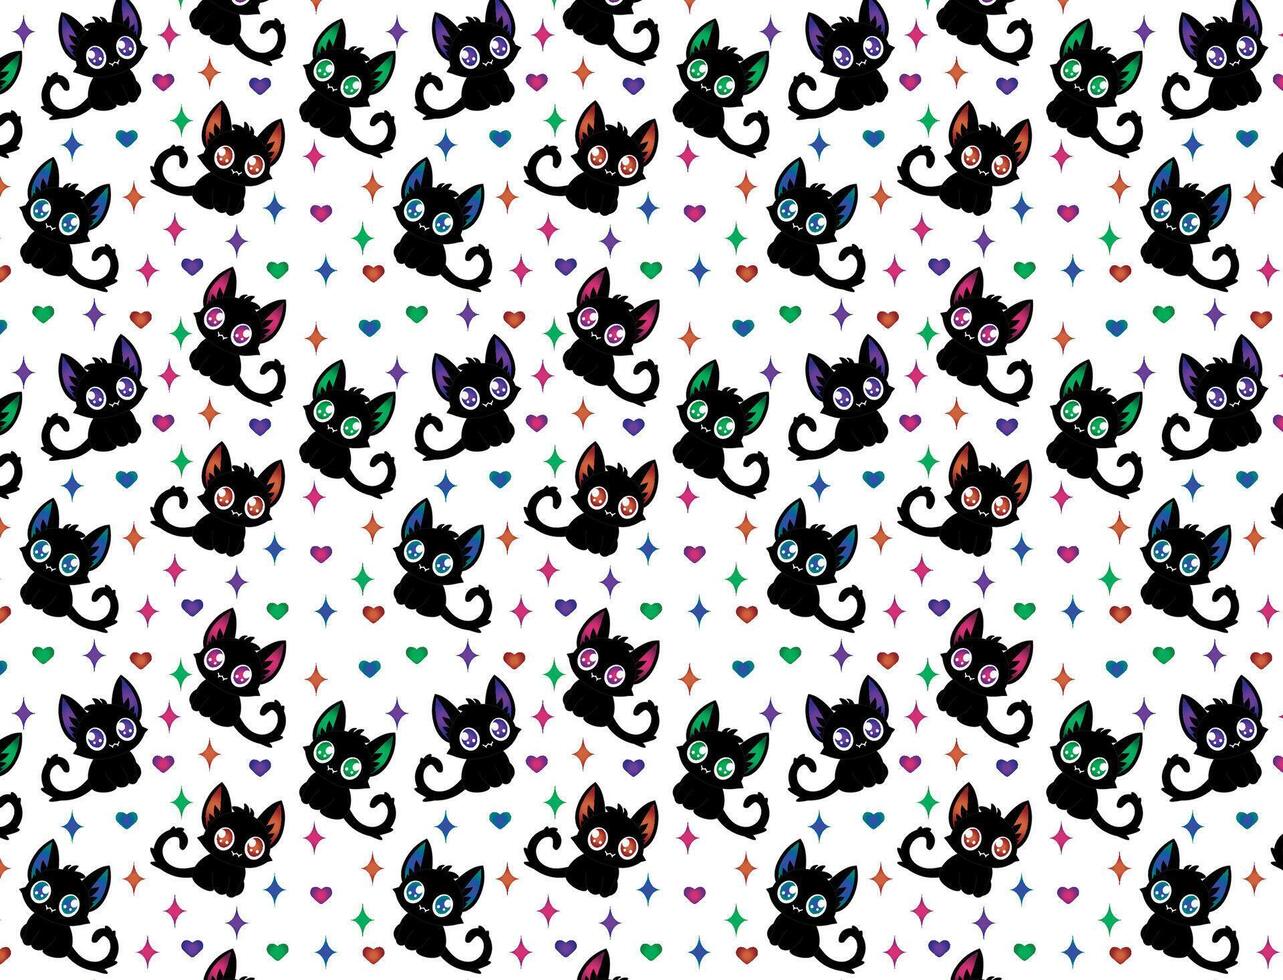 Cute gothic black cat illustration, vector pattern for woven backgrounds, wallpapers, papers